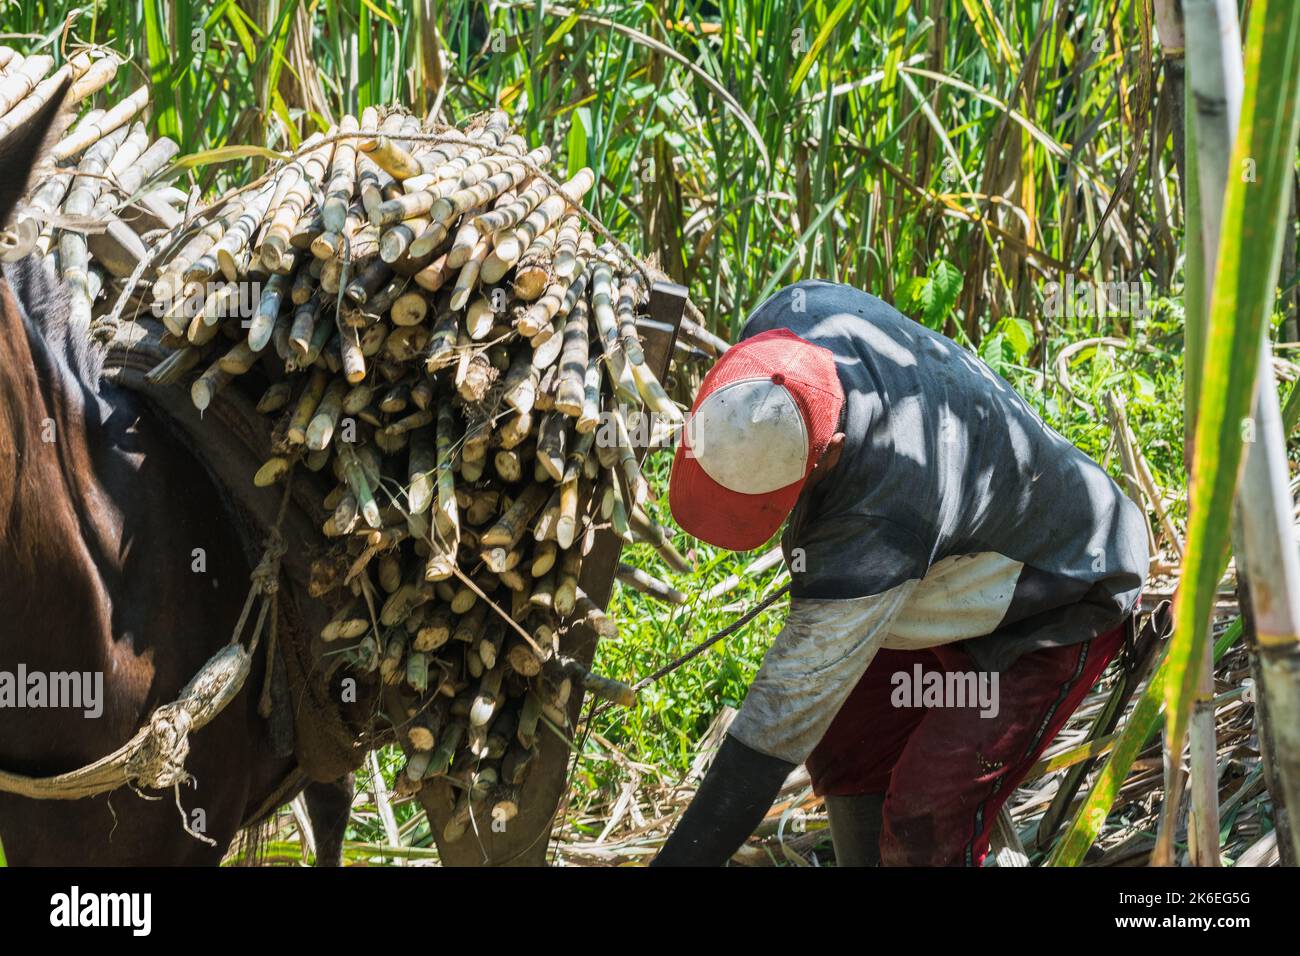 latin colombian farmer bending down to pick up a lasso to tie a load of sugar cane, mounted on his brown mule. man working in a sugar cane field in th Stock Photo